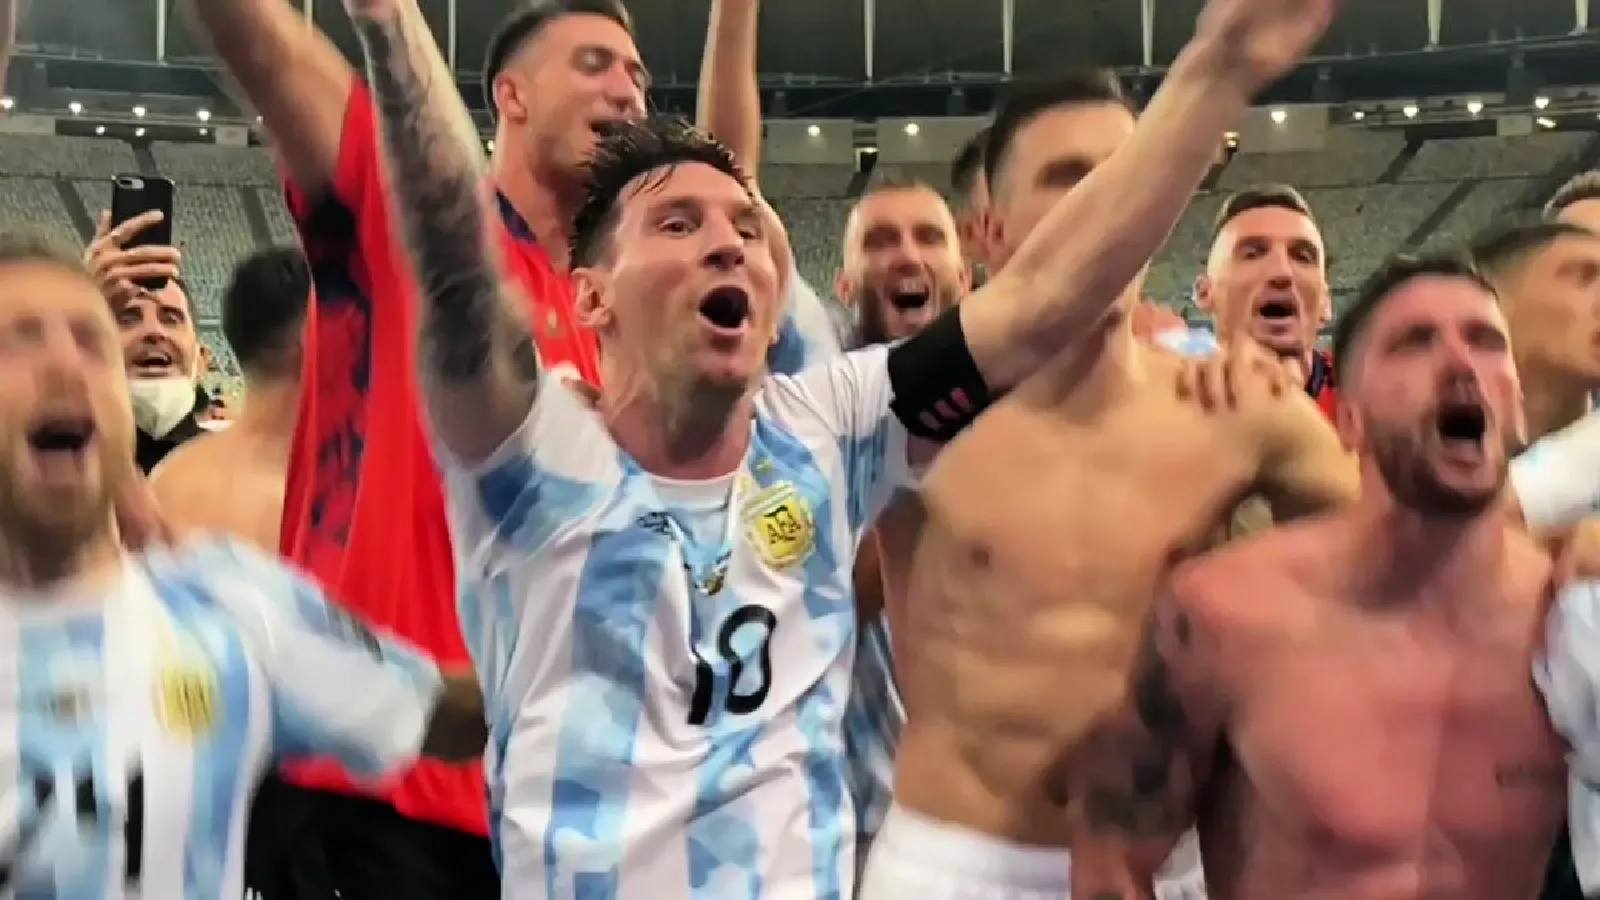 Lionel Messi was the center of attraction for all the right reasons as Argentina celebrated winning Copa America final against Brazil